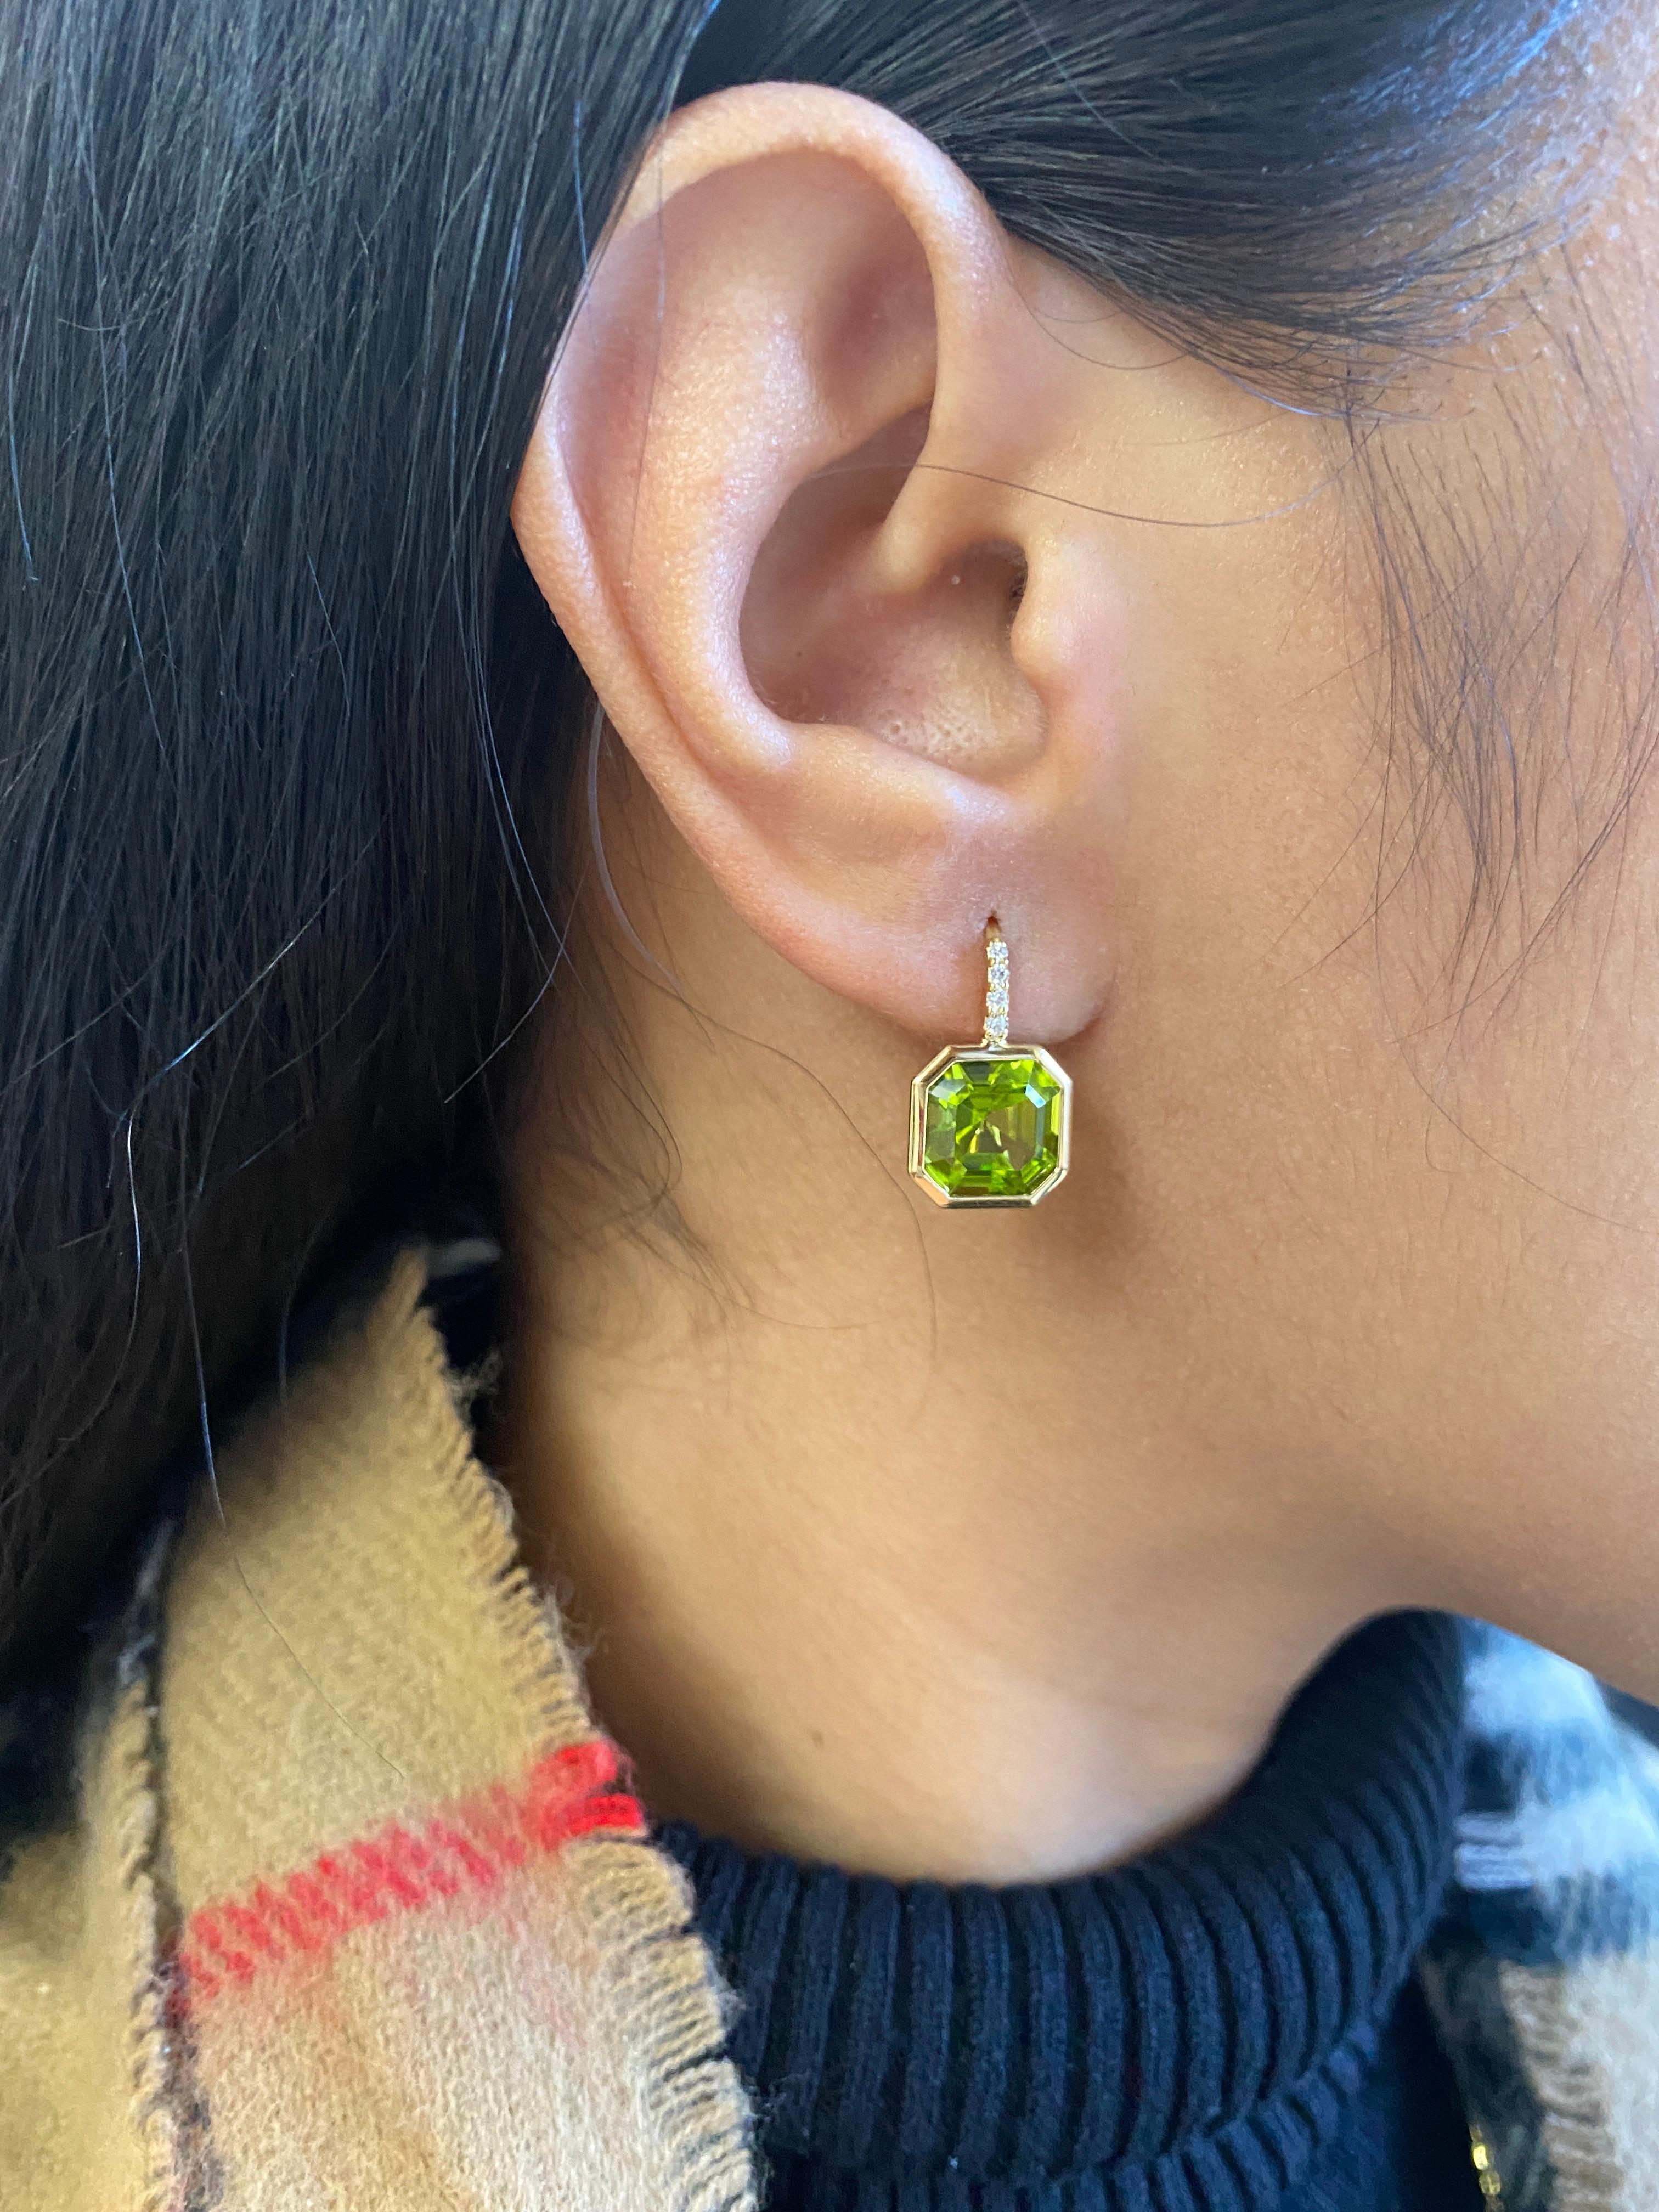 Elevate your style with these exquisite earrings featuring a stunning 9 x 9 mm Asscher-cut Peridot gemstone. Expertly set on a delicate wire of 18K Gold, these earrings are adorned with four dazzling Diamonds, adding a touch of luxury and sparkle to